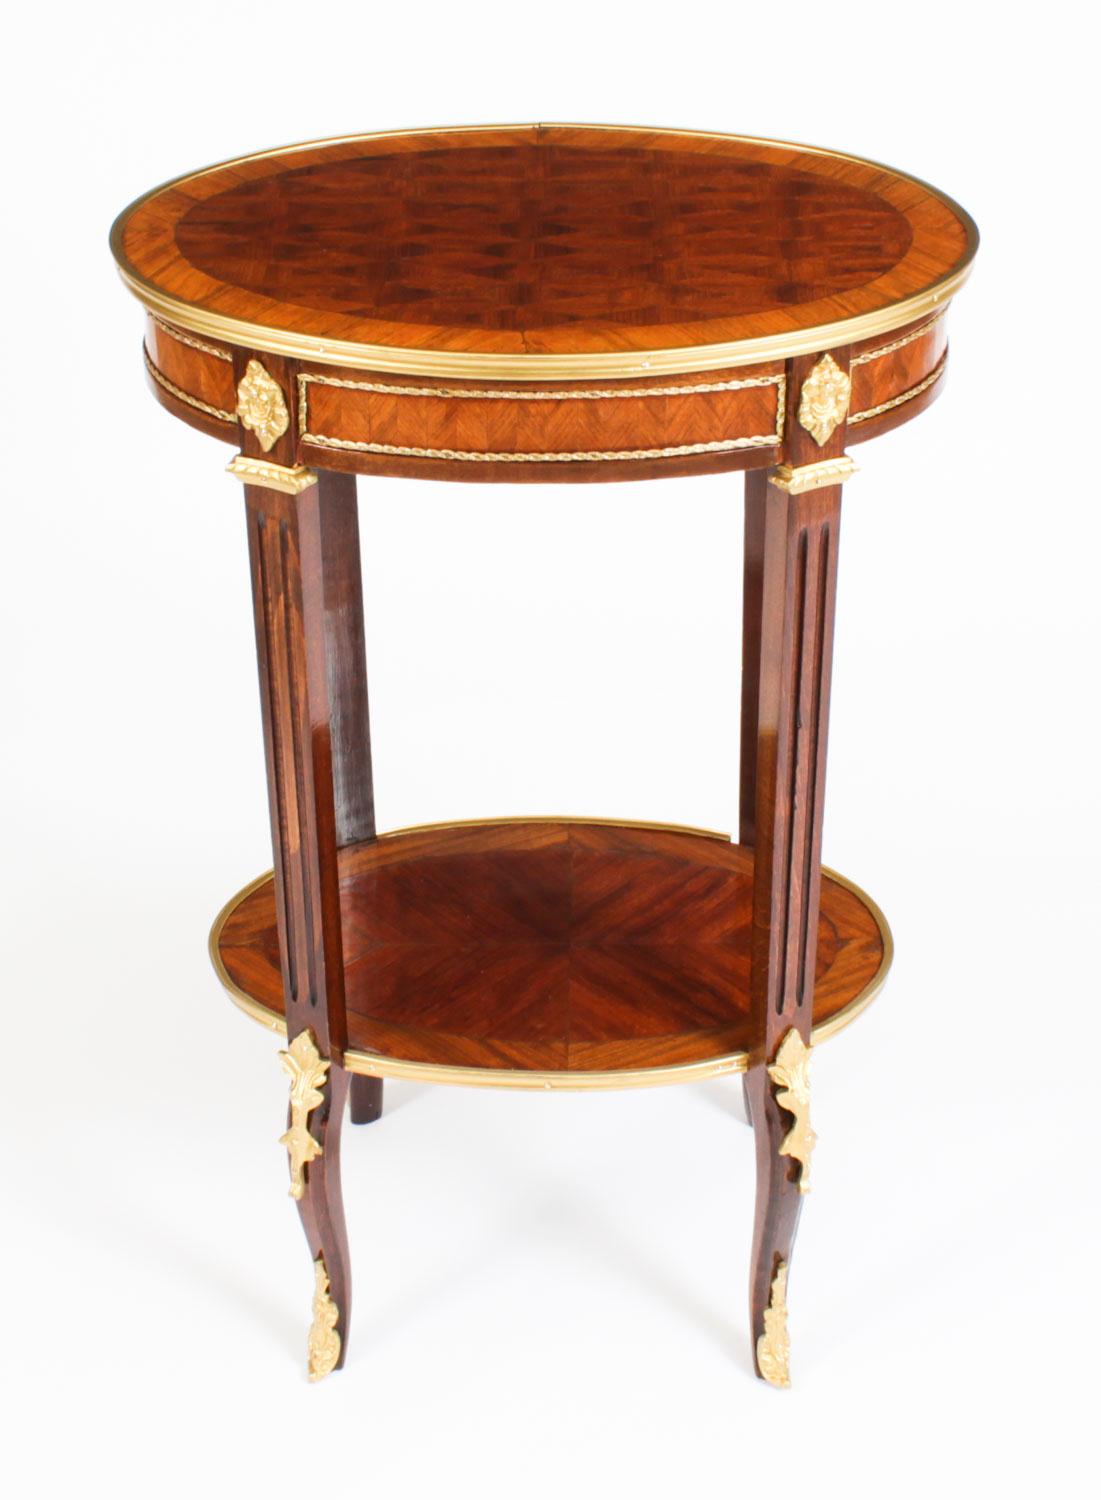 This is a beautiful antique French walnut banded oval occasional table, circa 1880 in date.

It has been masterfully crafted from beautiful parquetry decoration and ormolu mounts. It is raised on elegant fluted legs united by a decorative